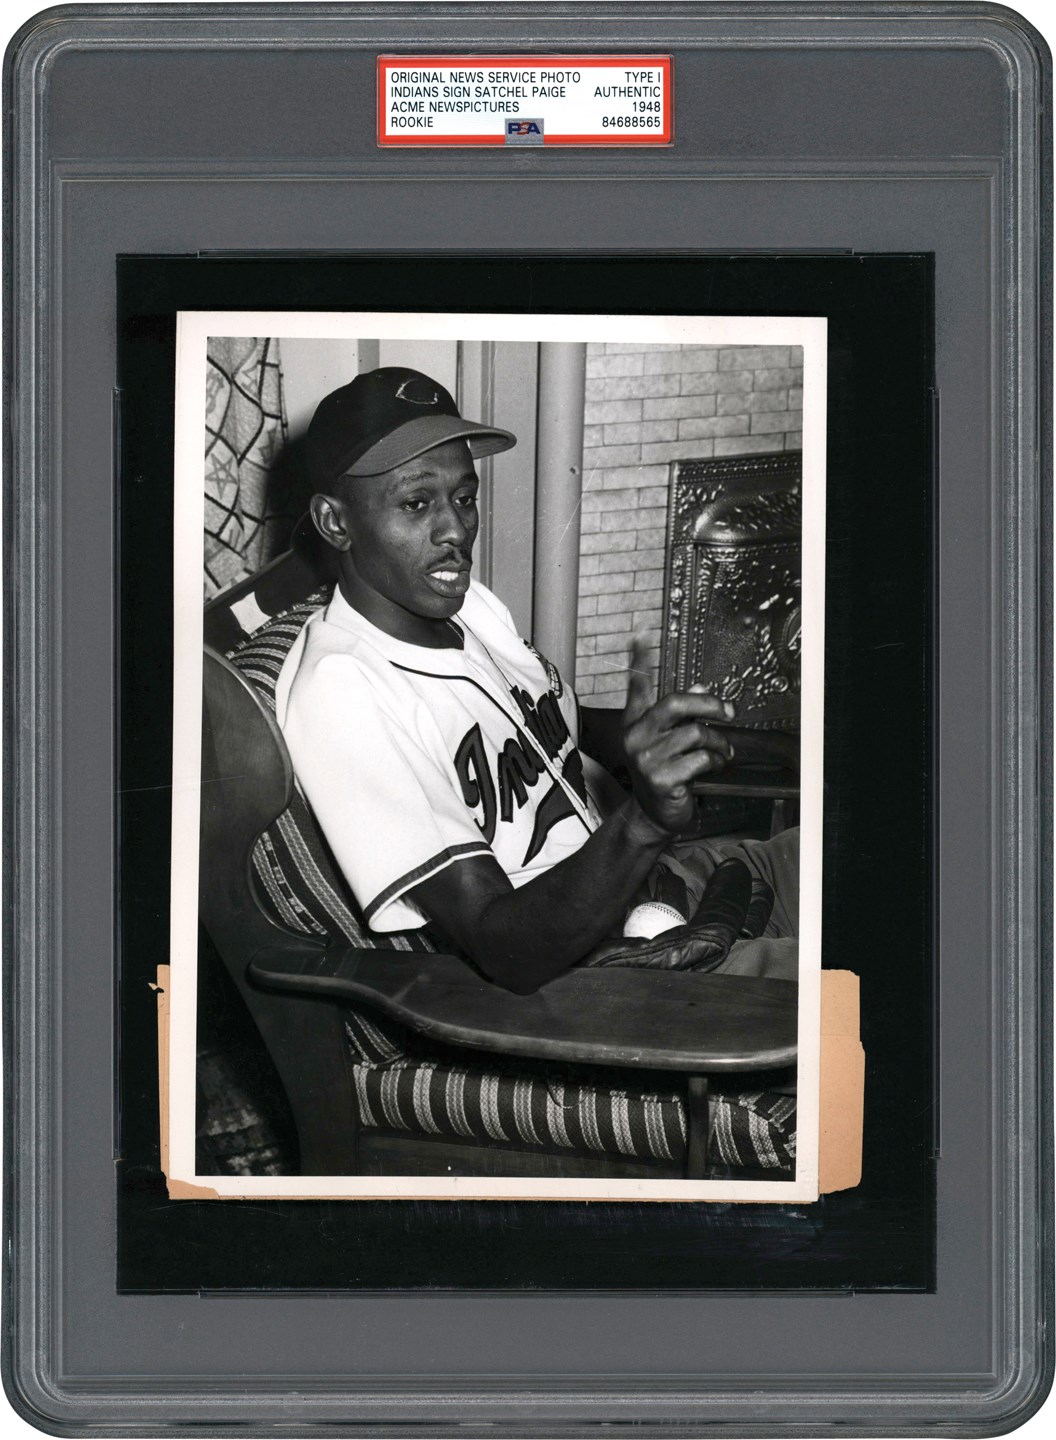 - 1948 Satchel Paige Rookie Photograph from the Day after Signing with Indians (PSA Type I)